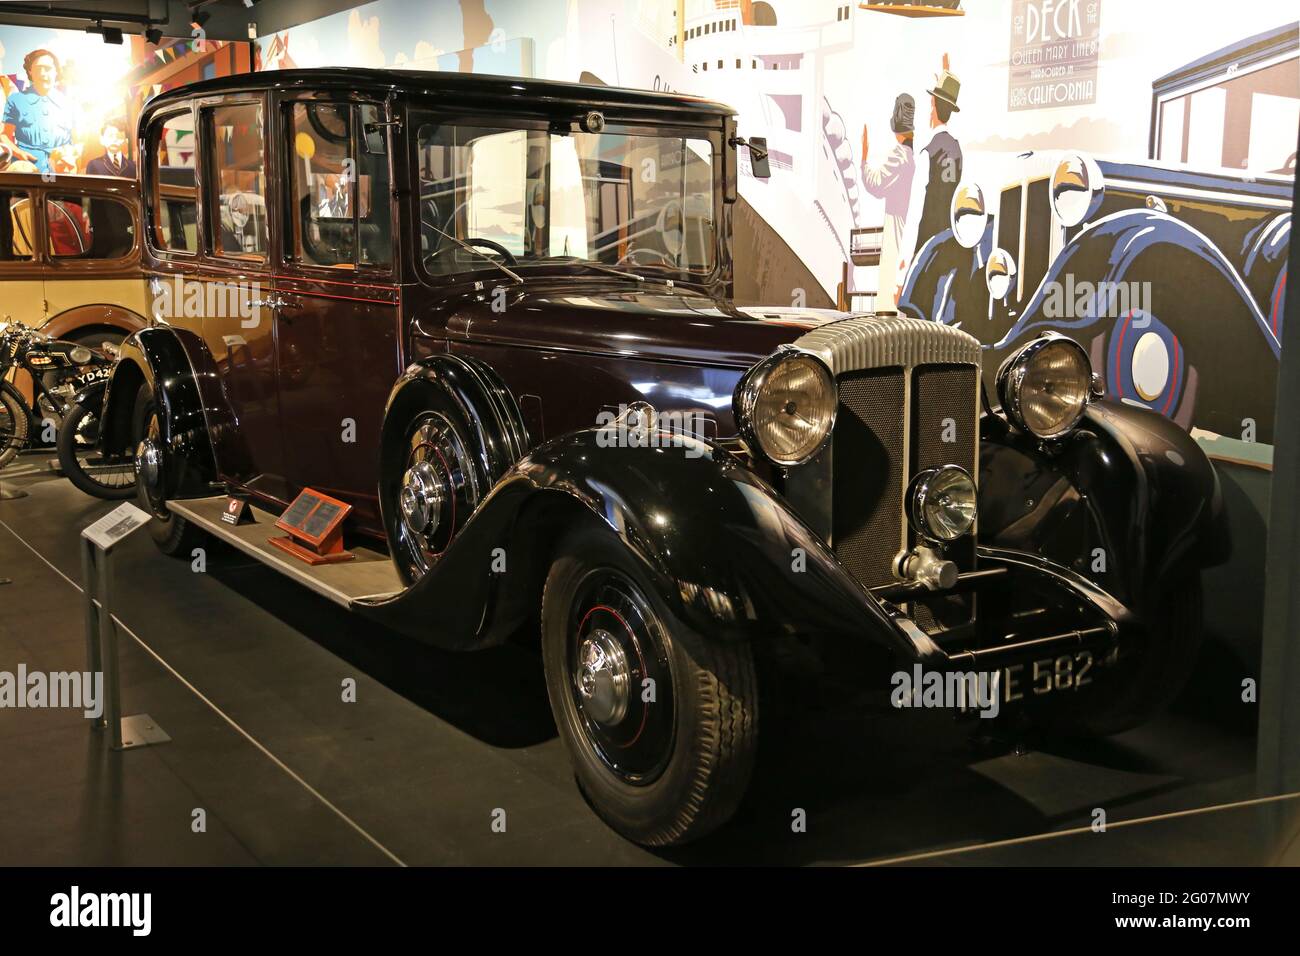 Queen Mary's Daimler Royal Limousine (1935), Coventry Transport Museum, Millennium Place, Coventry, West Midlands, England, Great Britain, UK, Europe Stock Photo